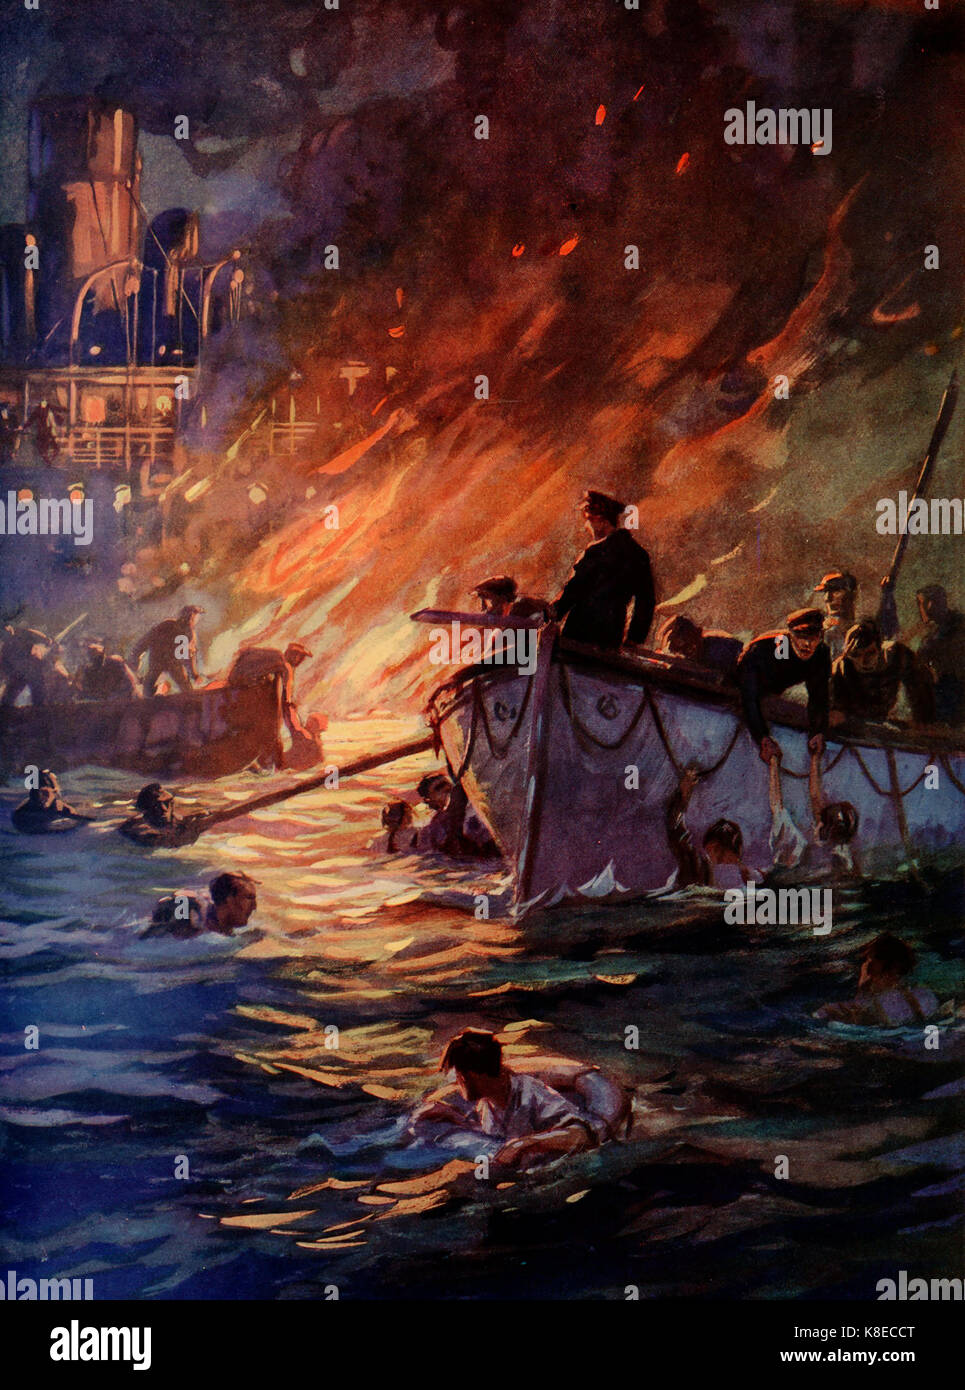 Rescuing survivors  from a burning ship at sea  -(From the Boys Own Annual 1932-33) Stock Photo